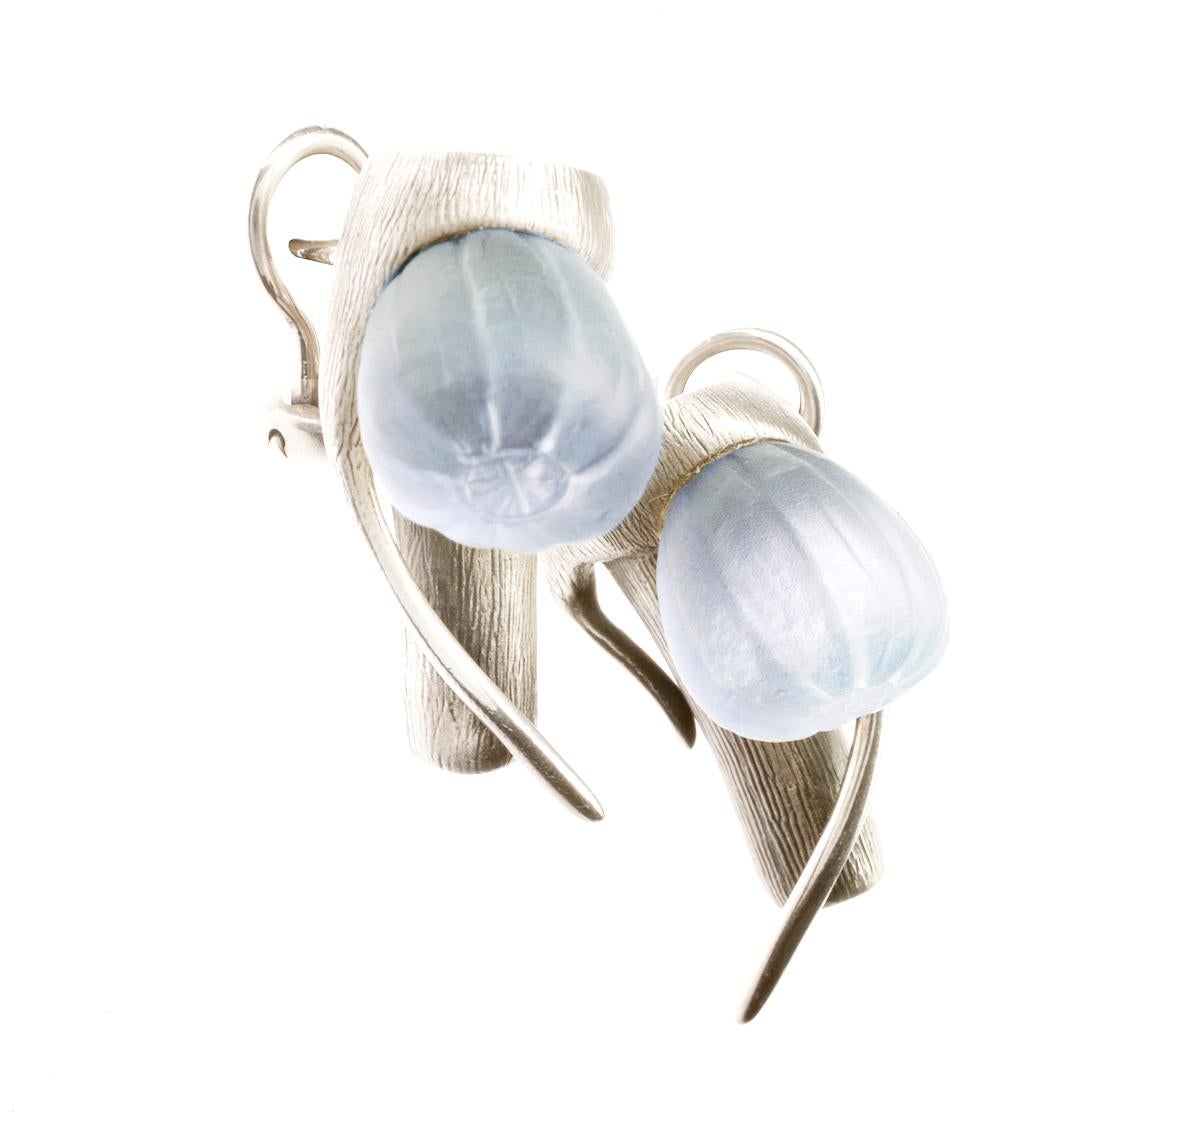 These fig stud earrings feature frosted blue quartz stones set in silver, making them perfect for summer. The tender color of the stones complements sun-kissed skin and highlights the face. These handcrafted designer earrings belong to a limited